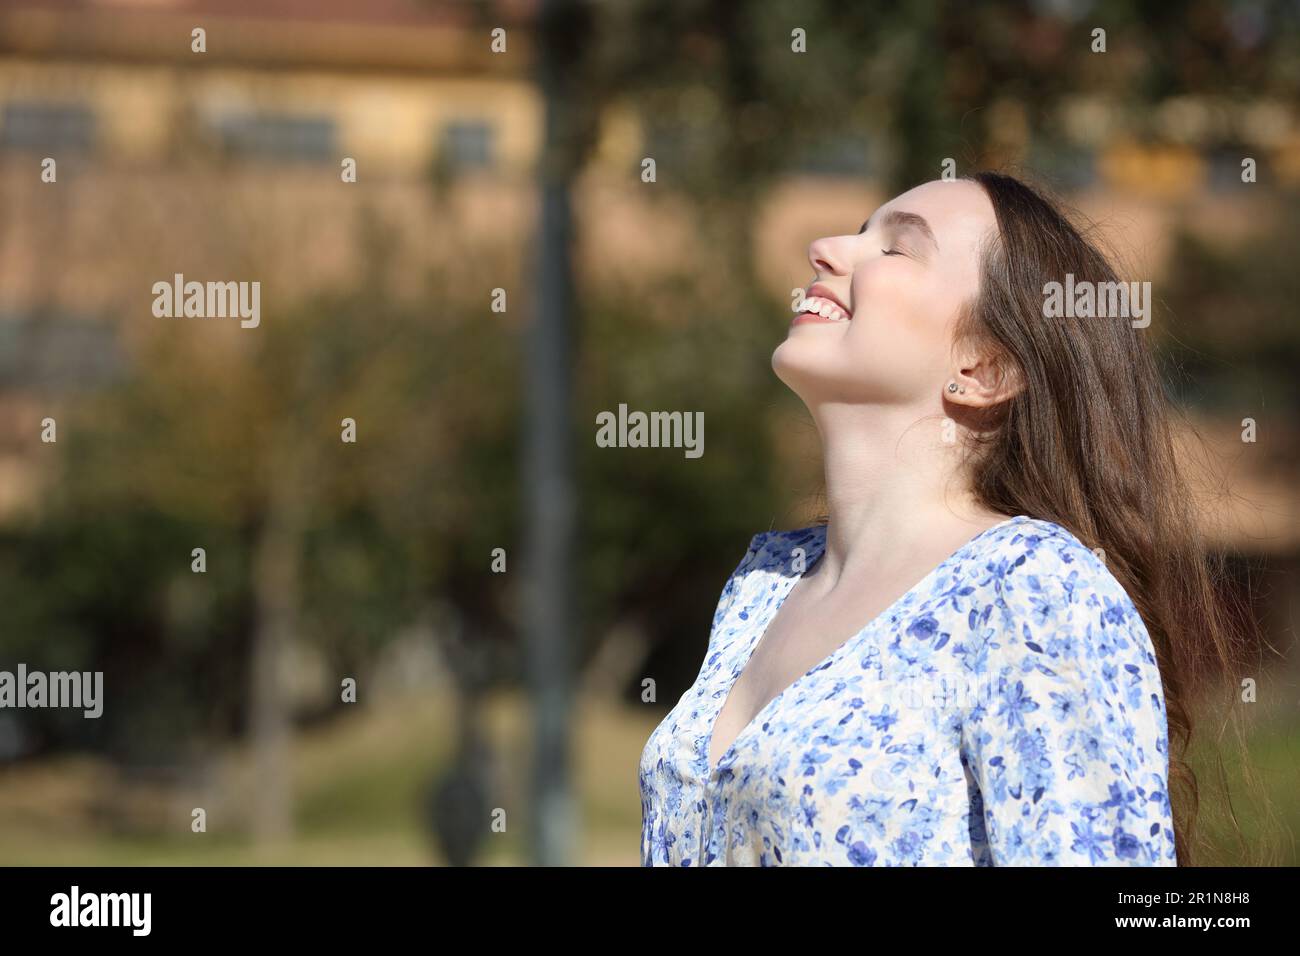 Side view portrait of a happy woman breathing fresh air in a park Stock Photo